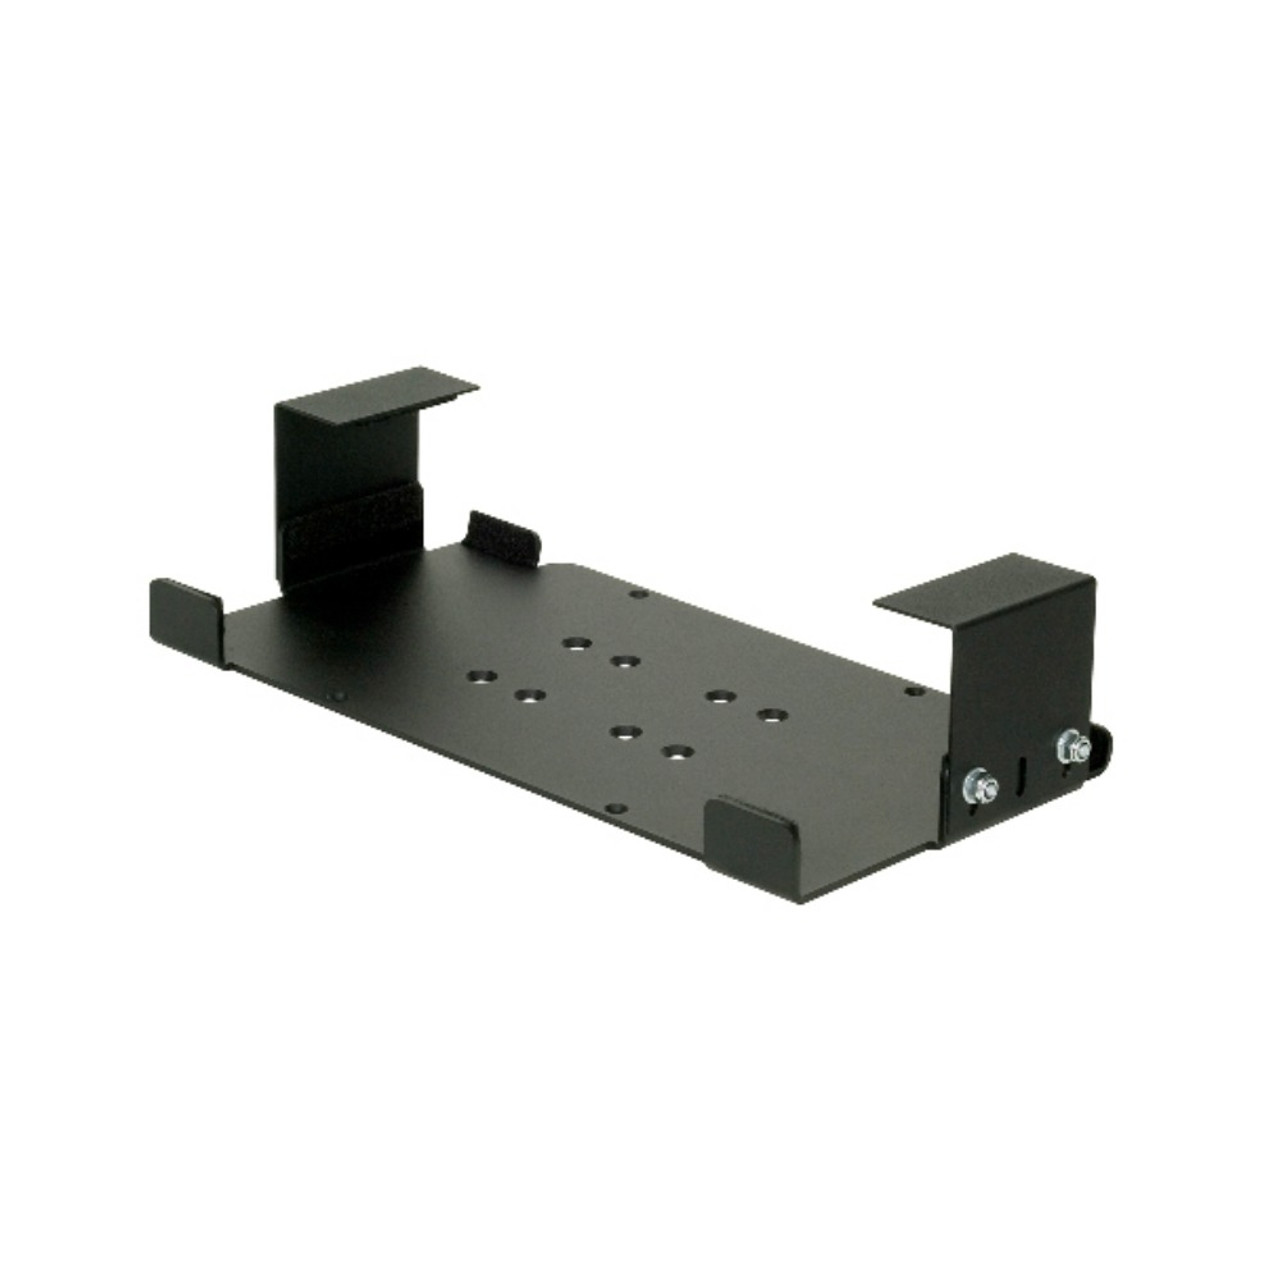 Lund PRBKT-HP* HP 450 or HP 460 & 470 Universal Printer Mount, Attaches to poles and motion attachments